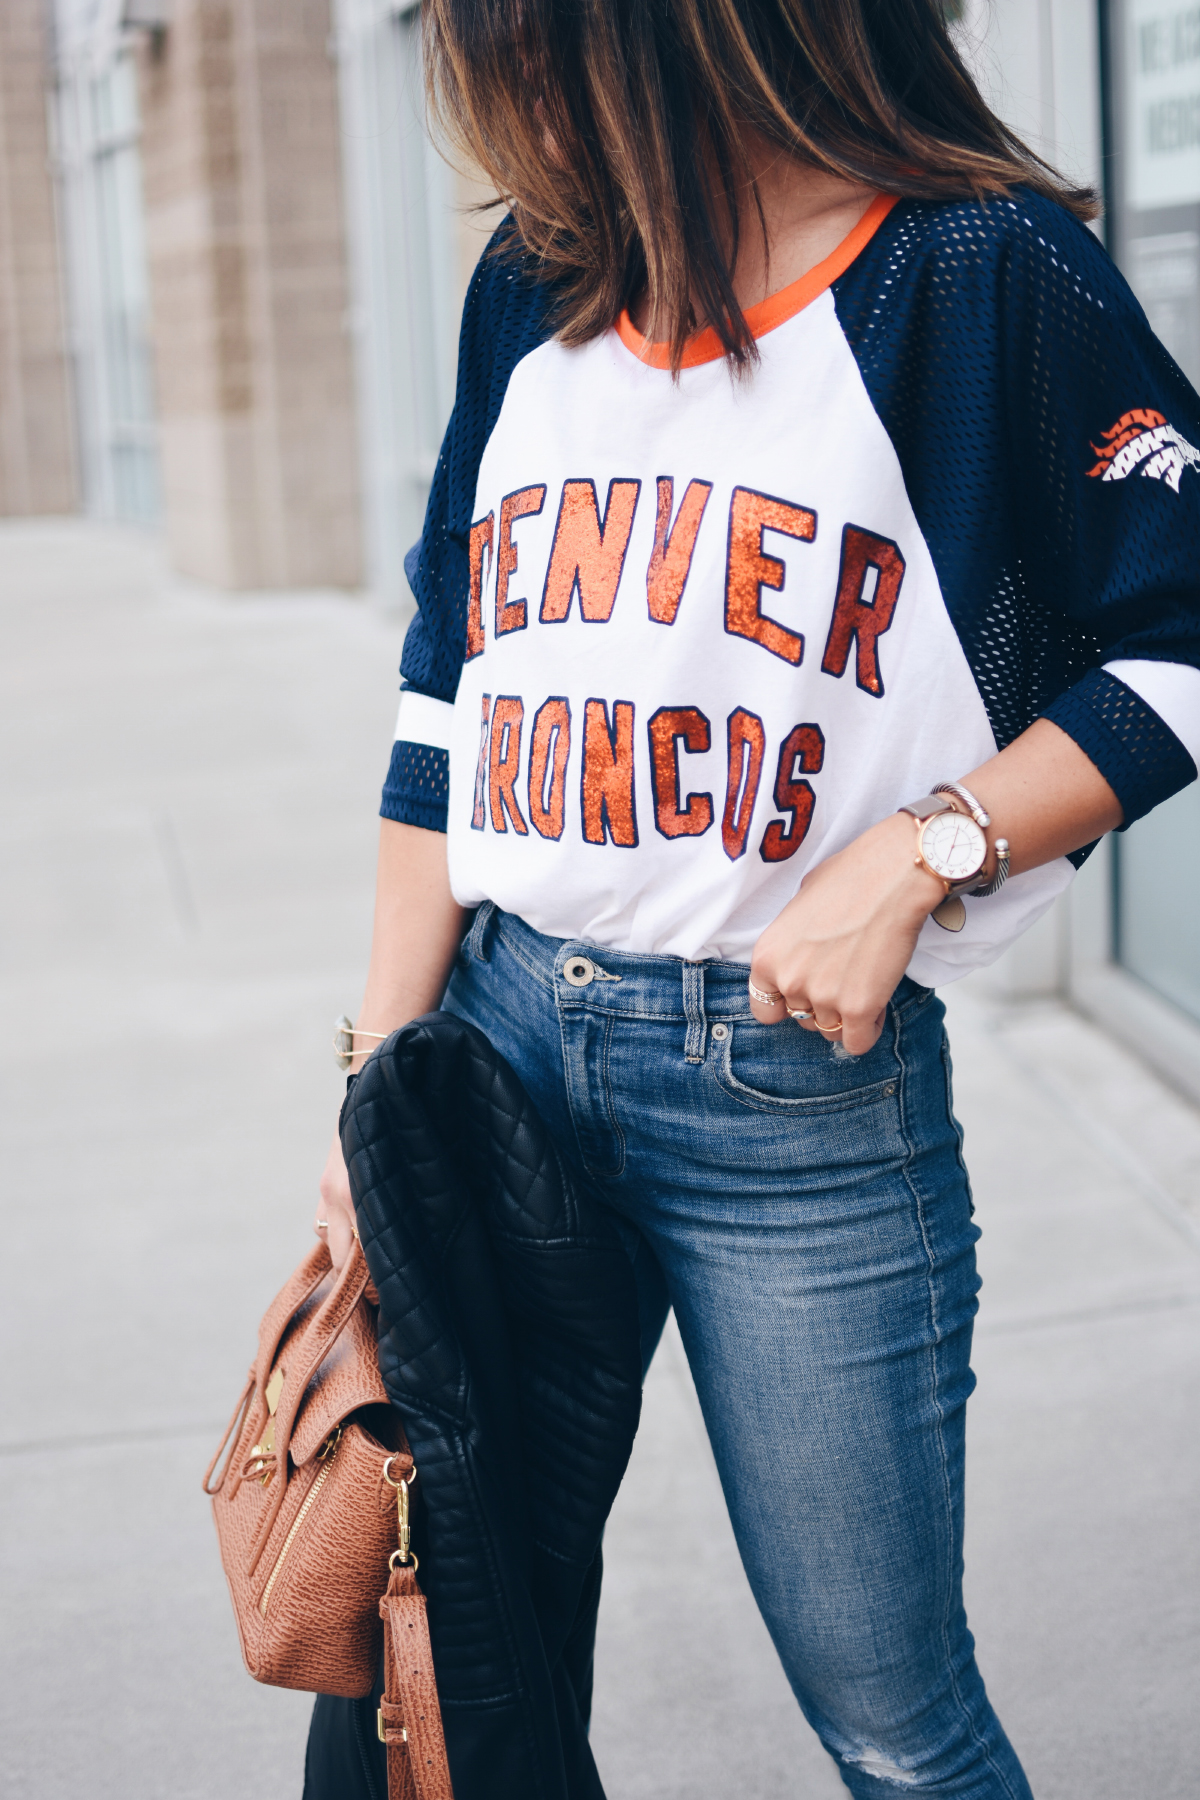 HOW TO STYLE YOUR DENVER BRONCOS GEAR